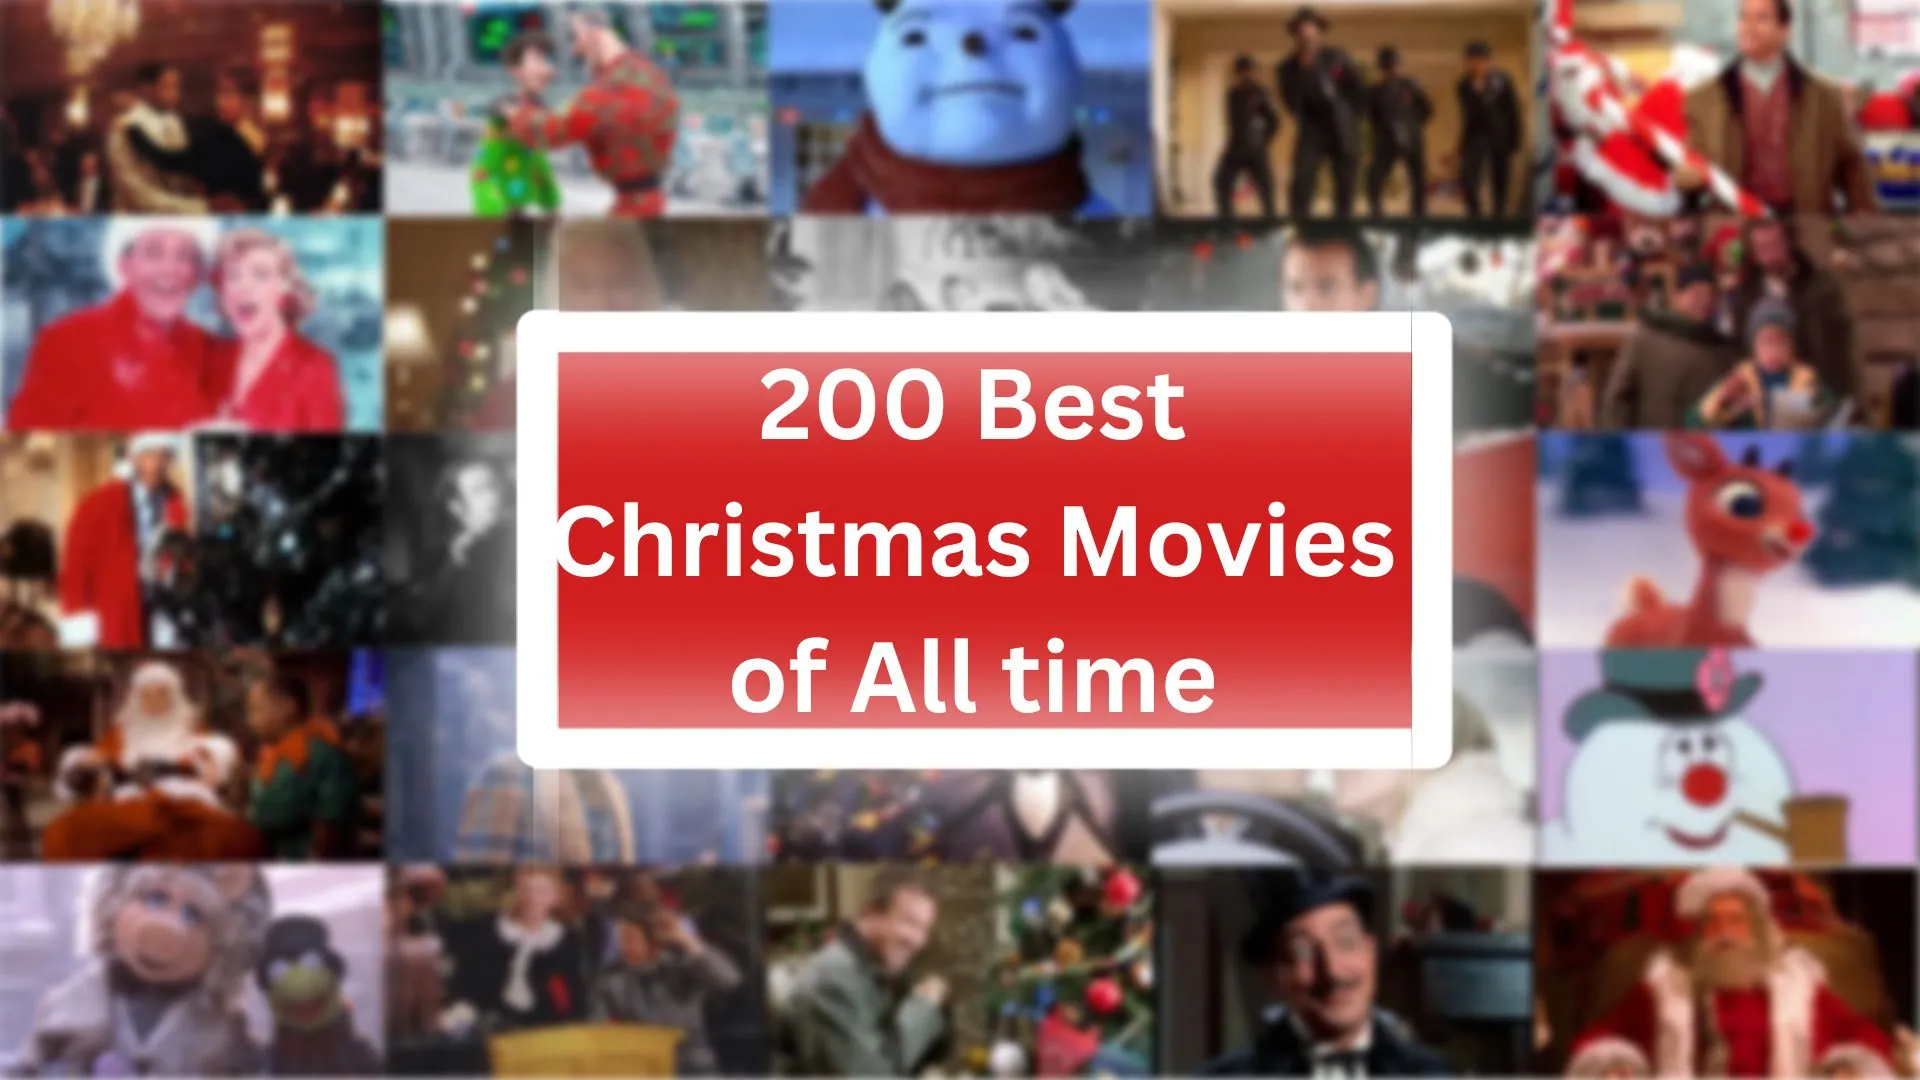 Best Christmas Movies of All time. Most popular movie during Christmas. 200 most popular Christmas movies. Christmas movies list.